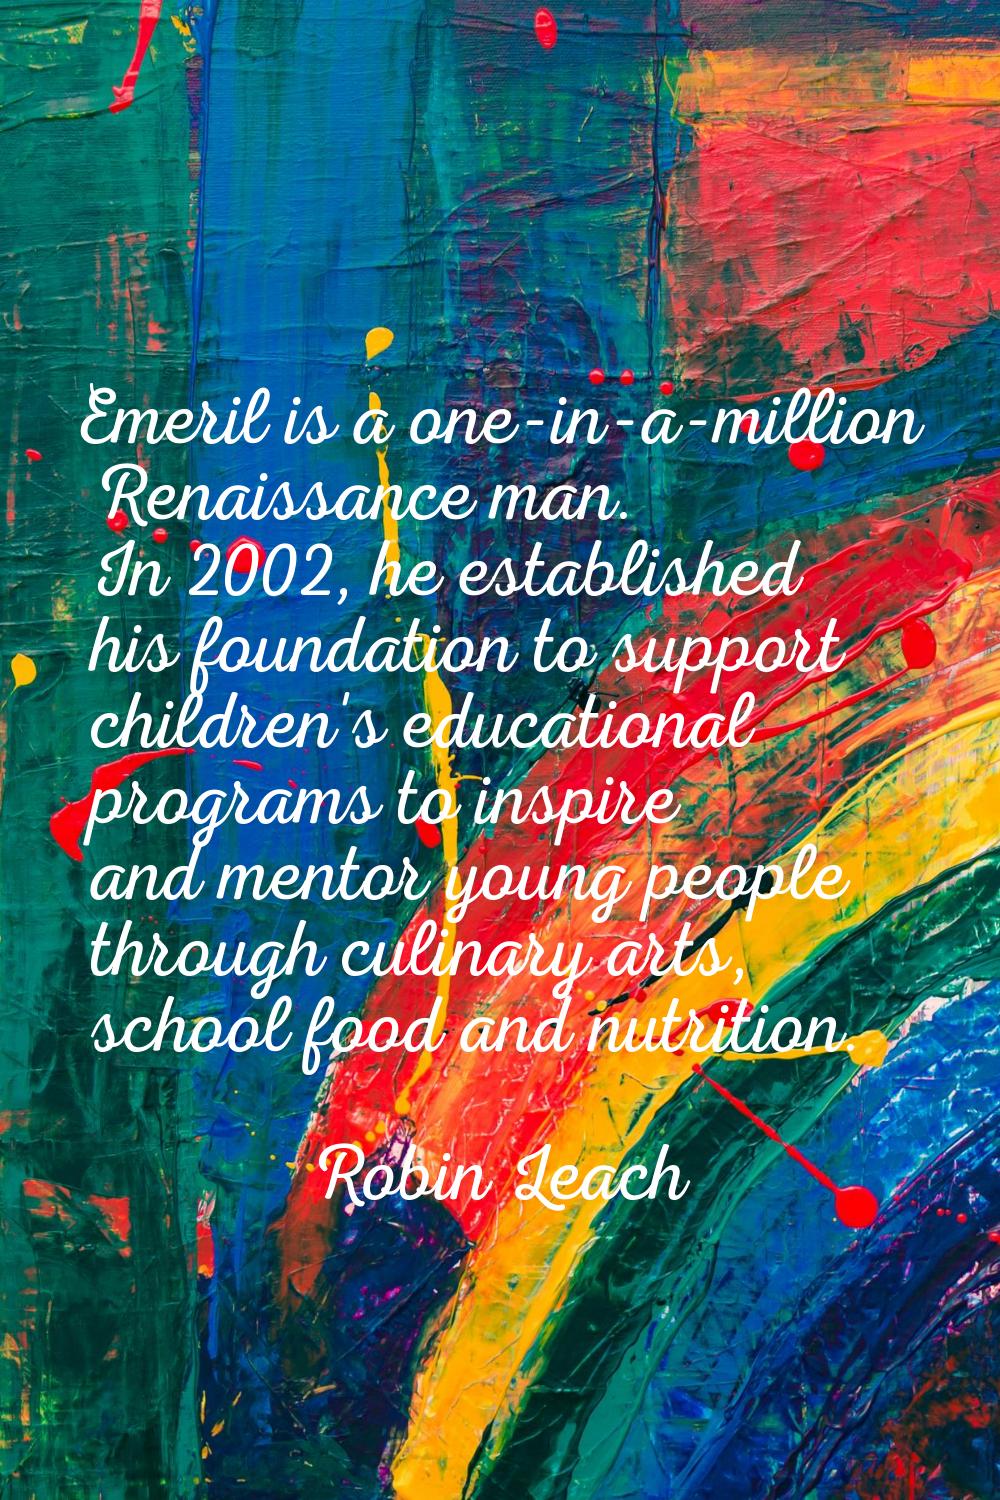 Emeril is a one-in-a-million Renaissance man. In 2002, he established his foundation to support chi